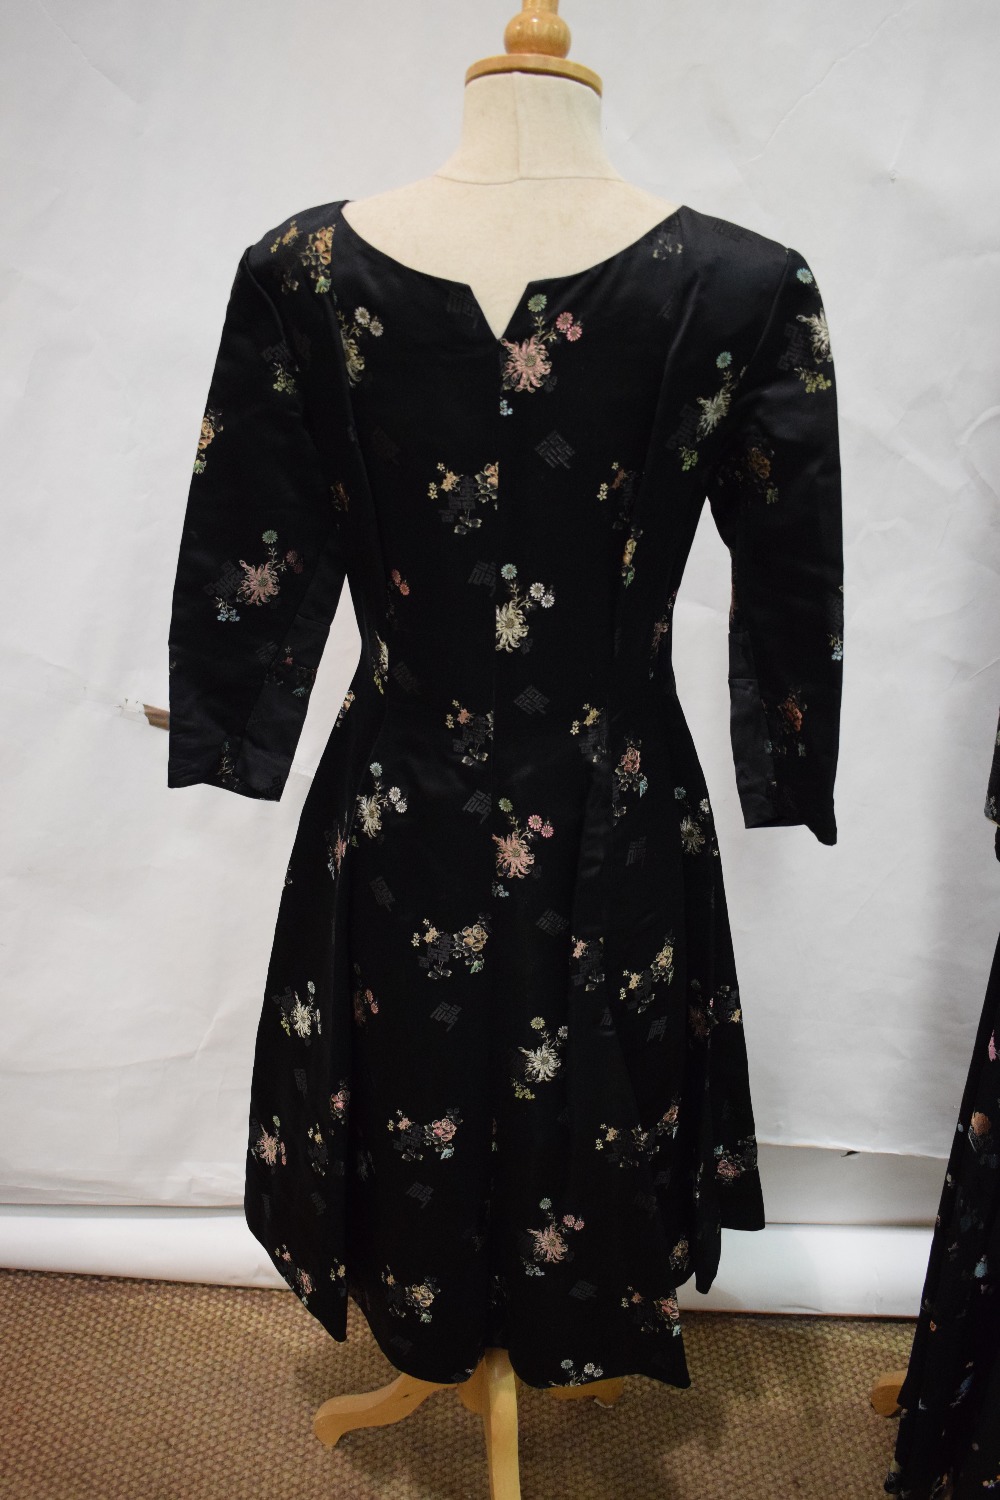 Chinese brocaded black satin evening coat and dress, mid-20th century, made for the Western - Image 7 of 7